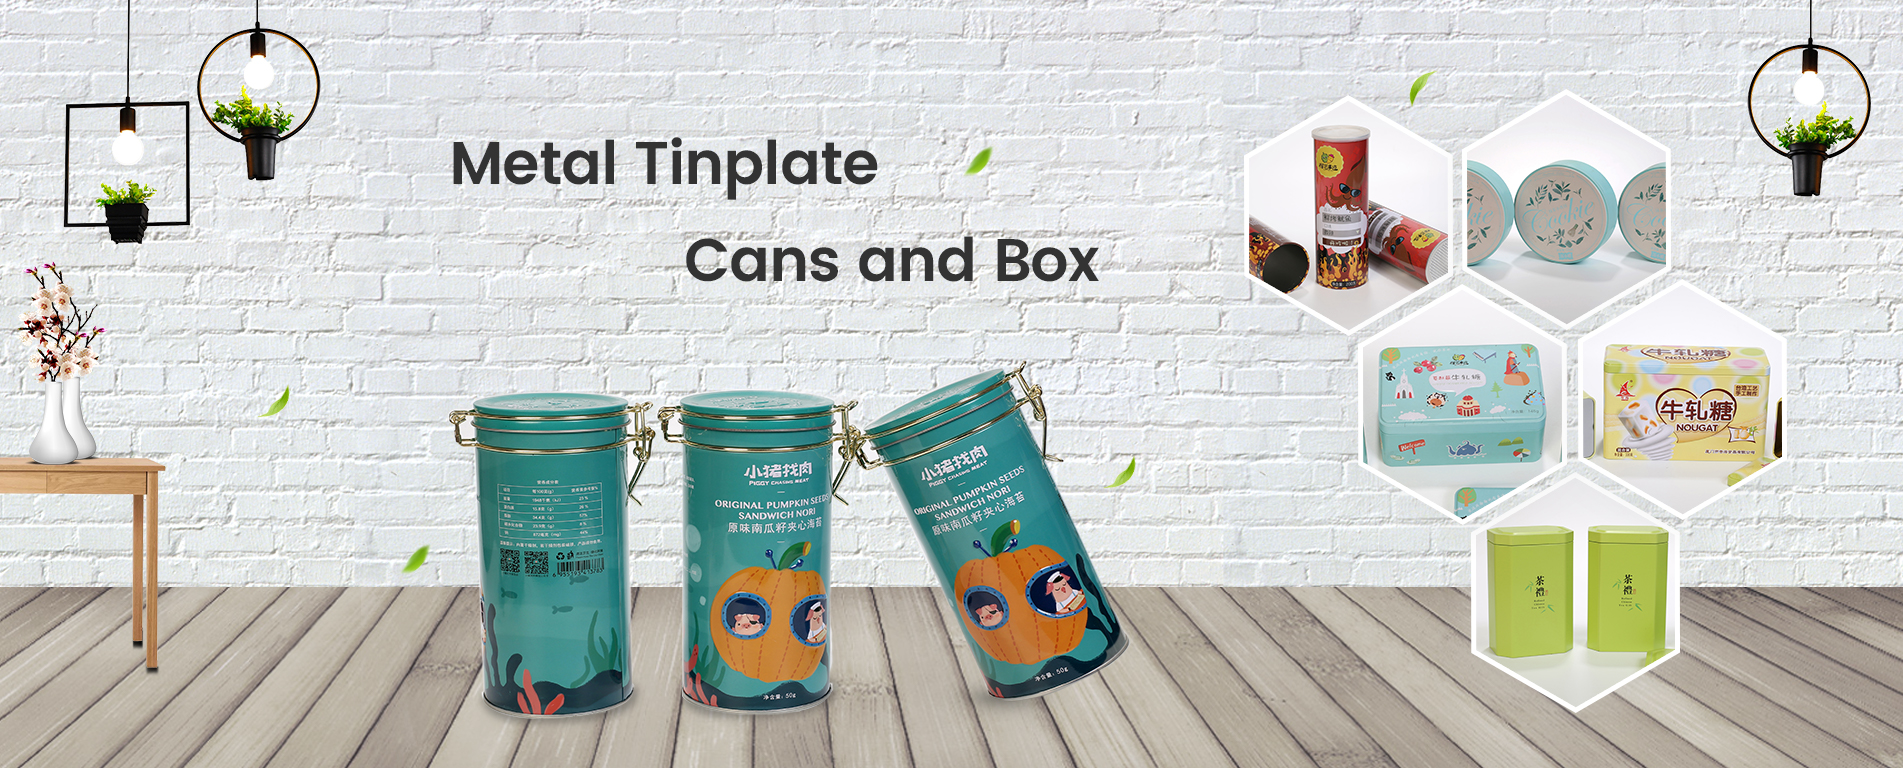 Metal Tinplate Cans and Box